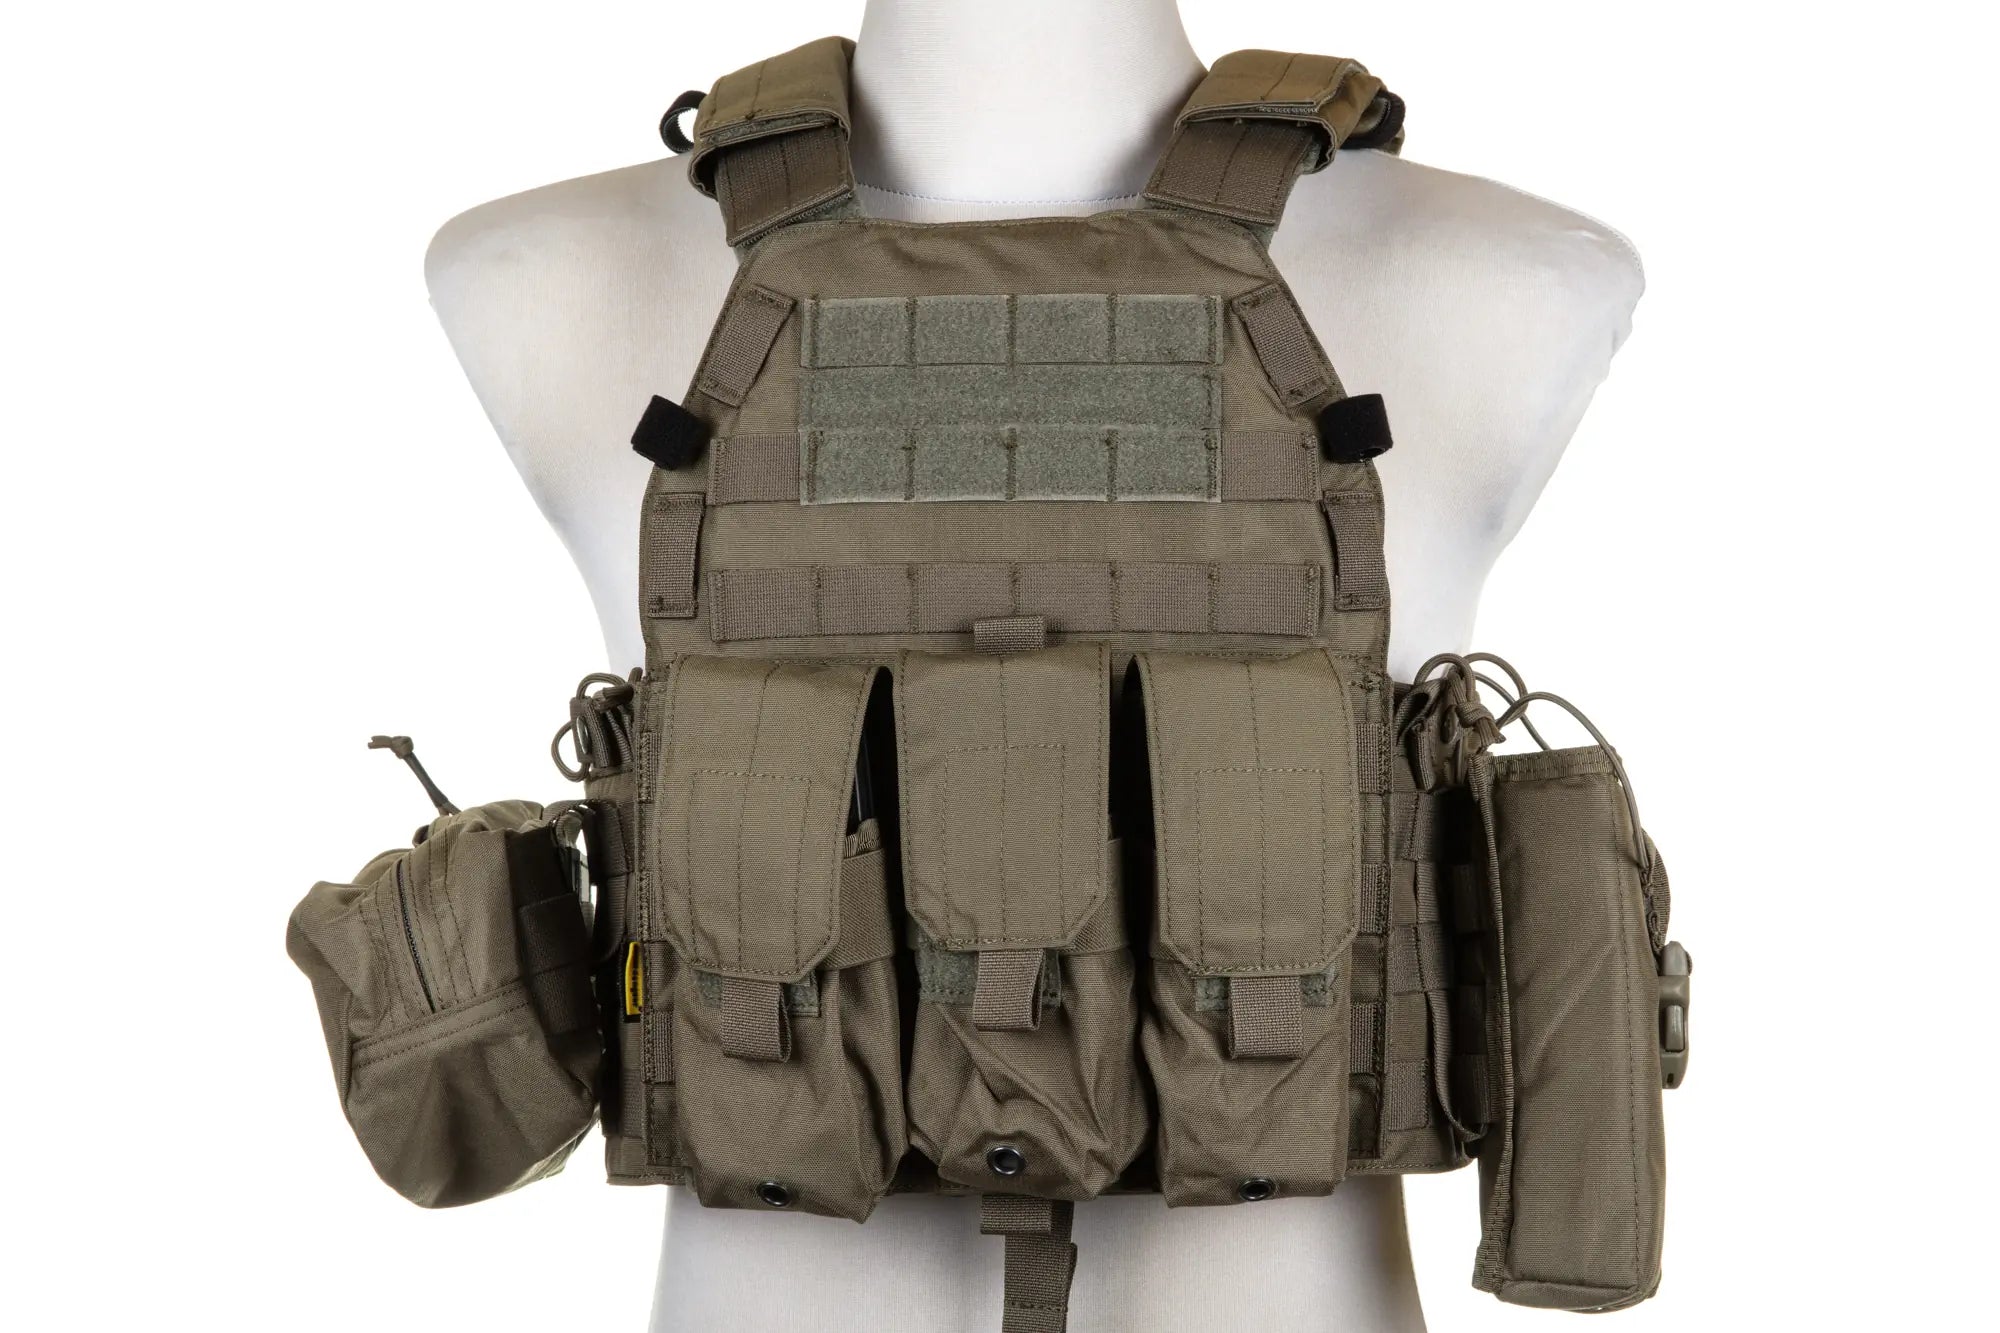 Emerson Gear 6094A Style Plate Carrier waistcoat with Ranger Green cargo kit-5